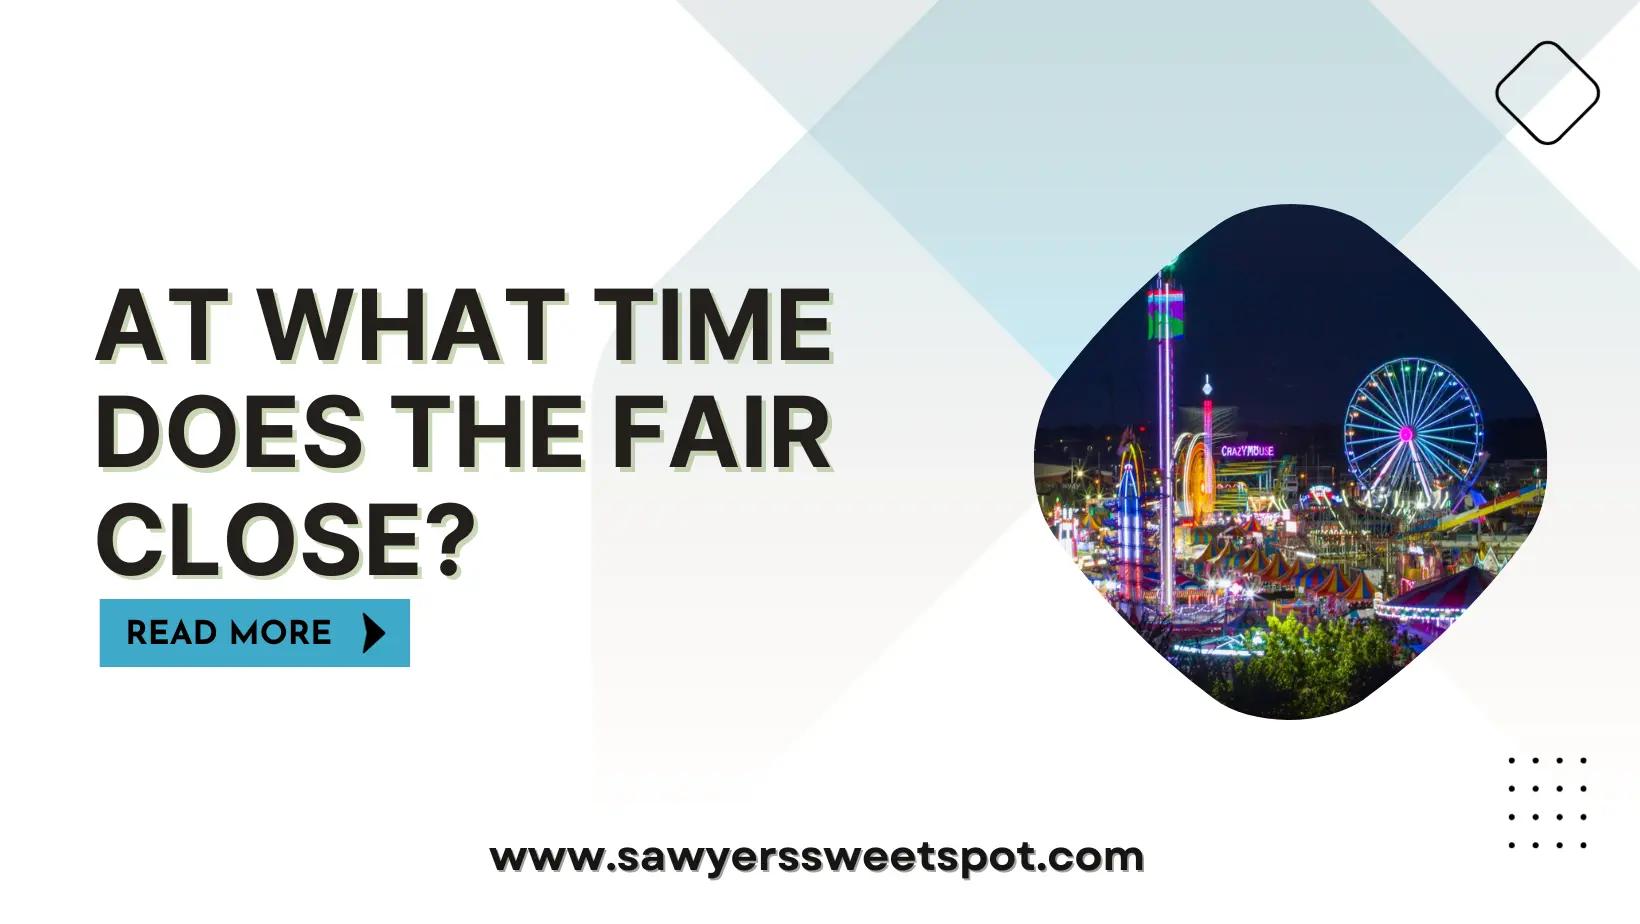 At What Time Does The Fair Close?